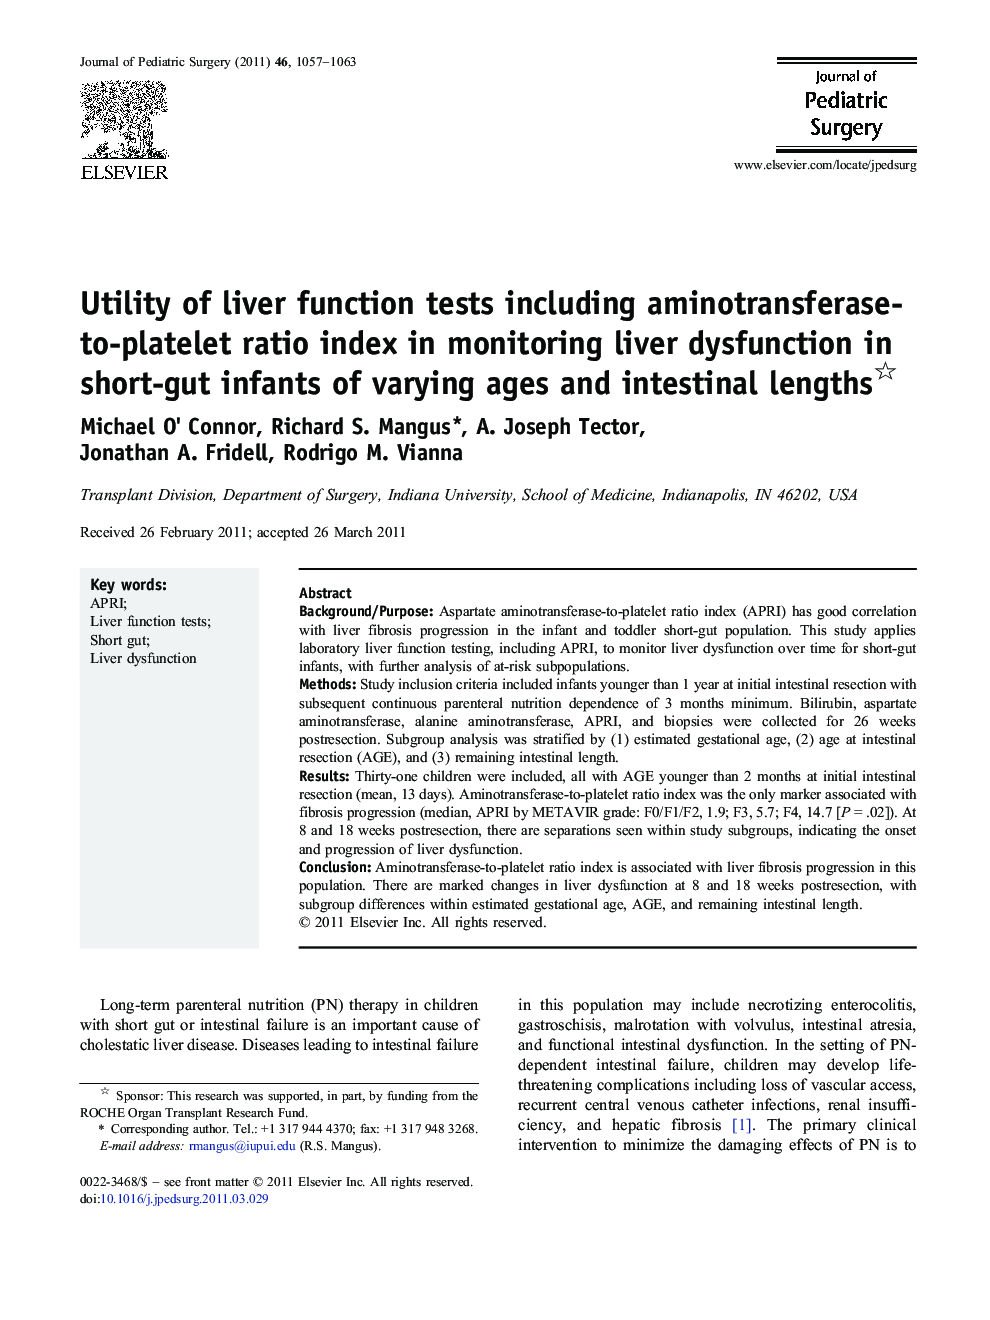 Utility of liver function tests including aminotransferase-to-platelet ratio index in monitoring liver dysfunction in short-gut infants of varying ages and intestinal lengths 